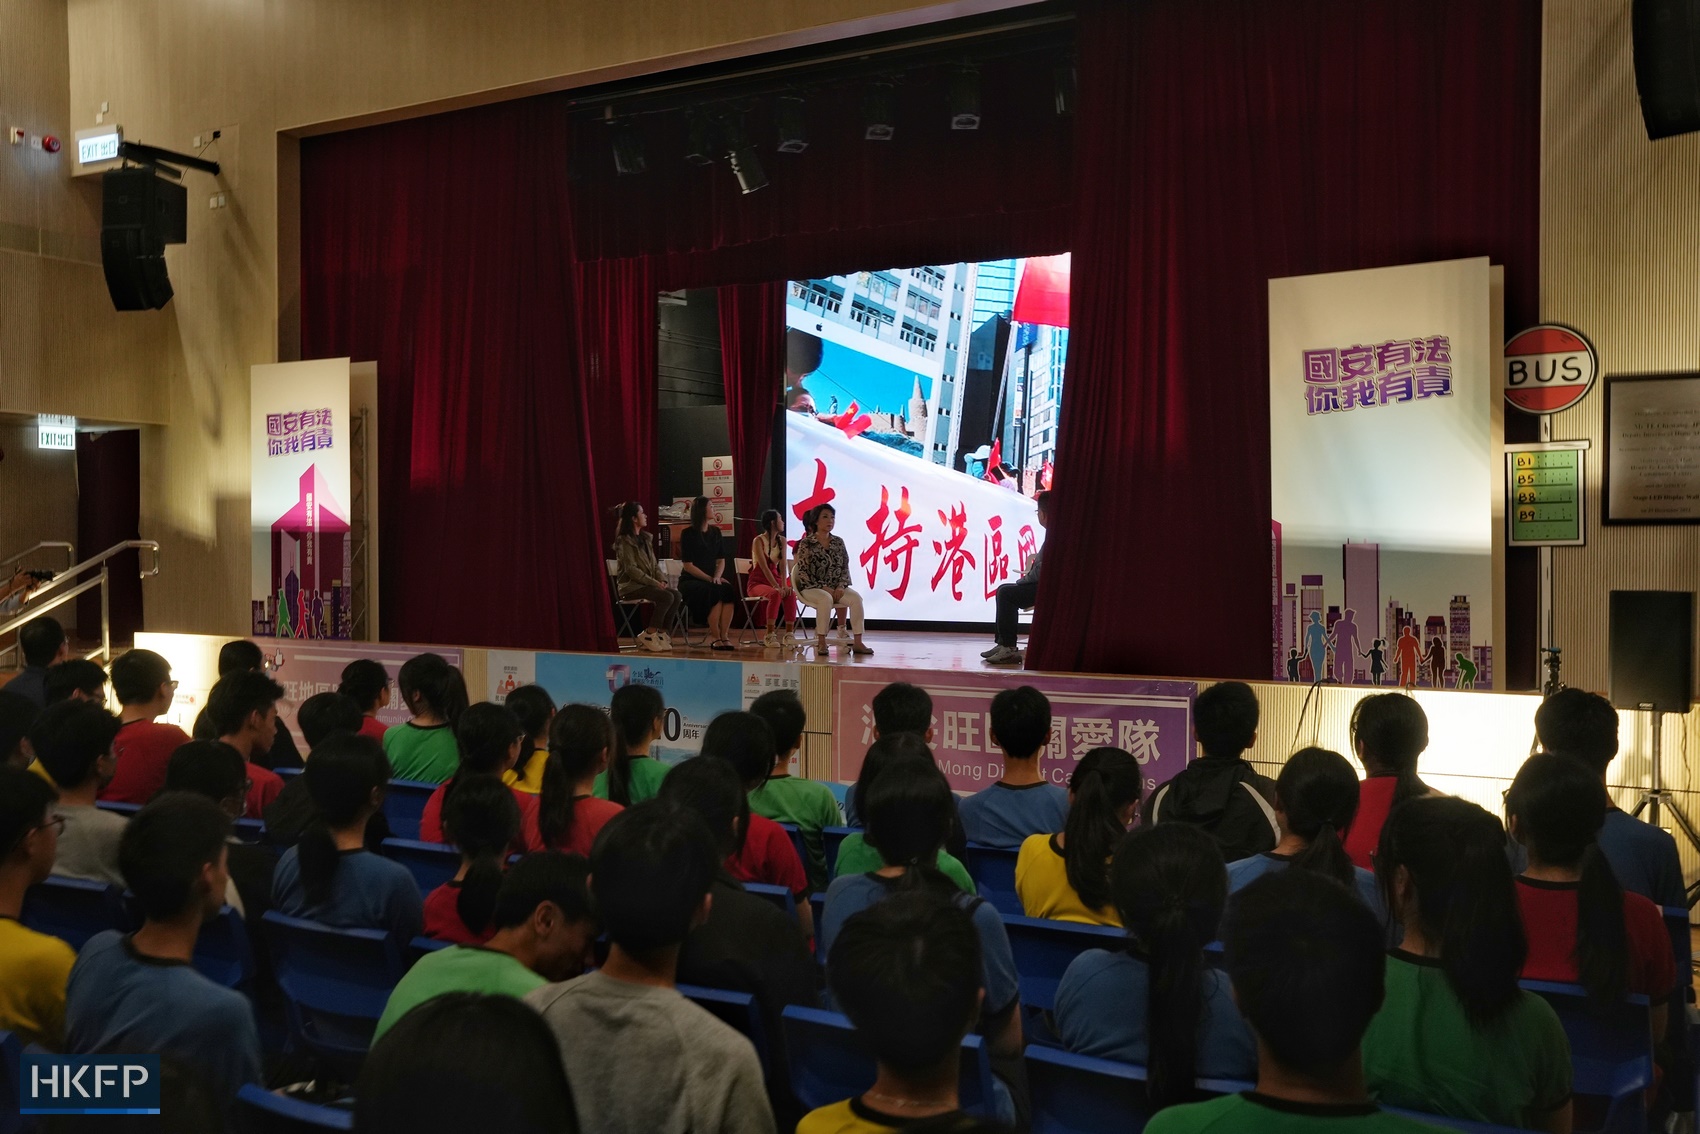 A drama performance, presented by the care team of Yau Tsim Mok district, is held at Henry G. Leong Yaumatei Community Centre on April 15, 2024, as part of the activities of National Security Education Day.